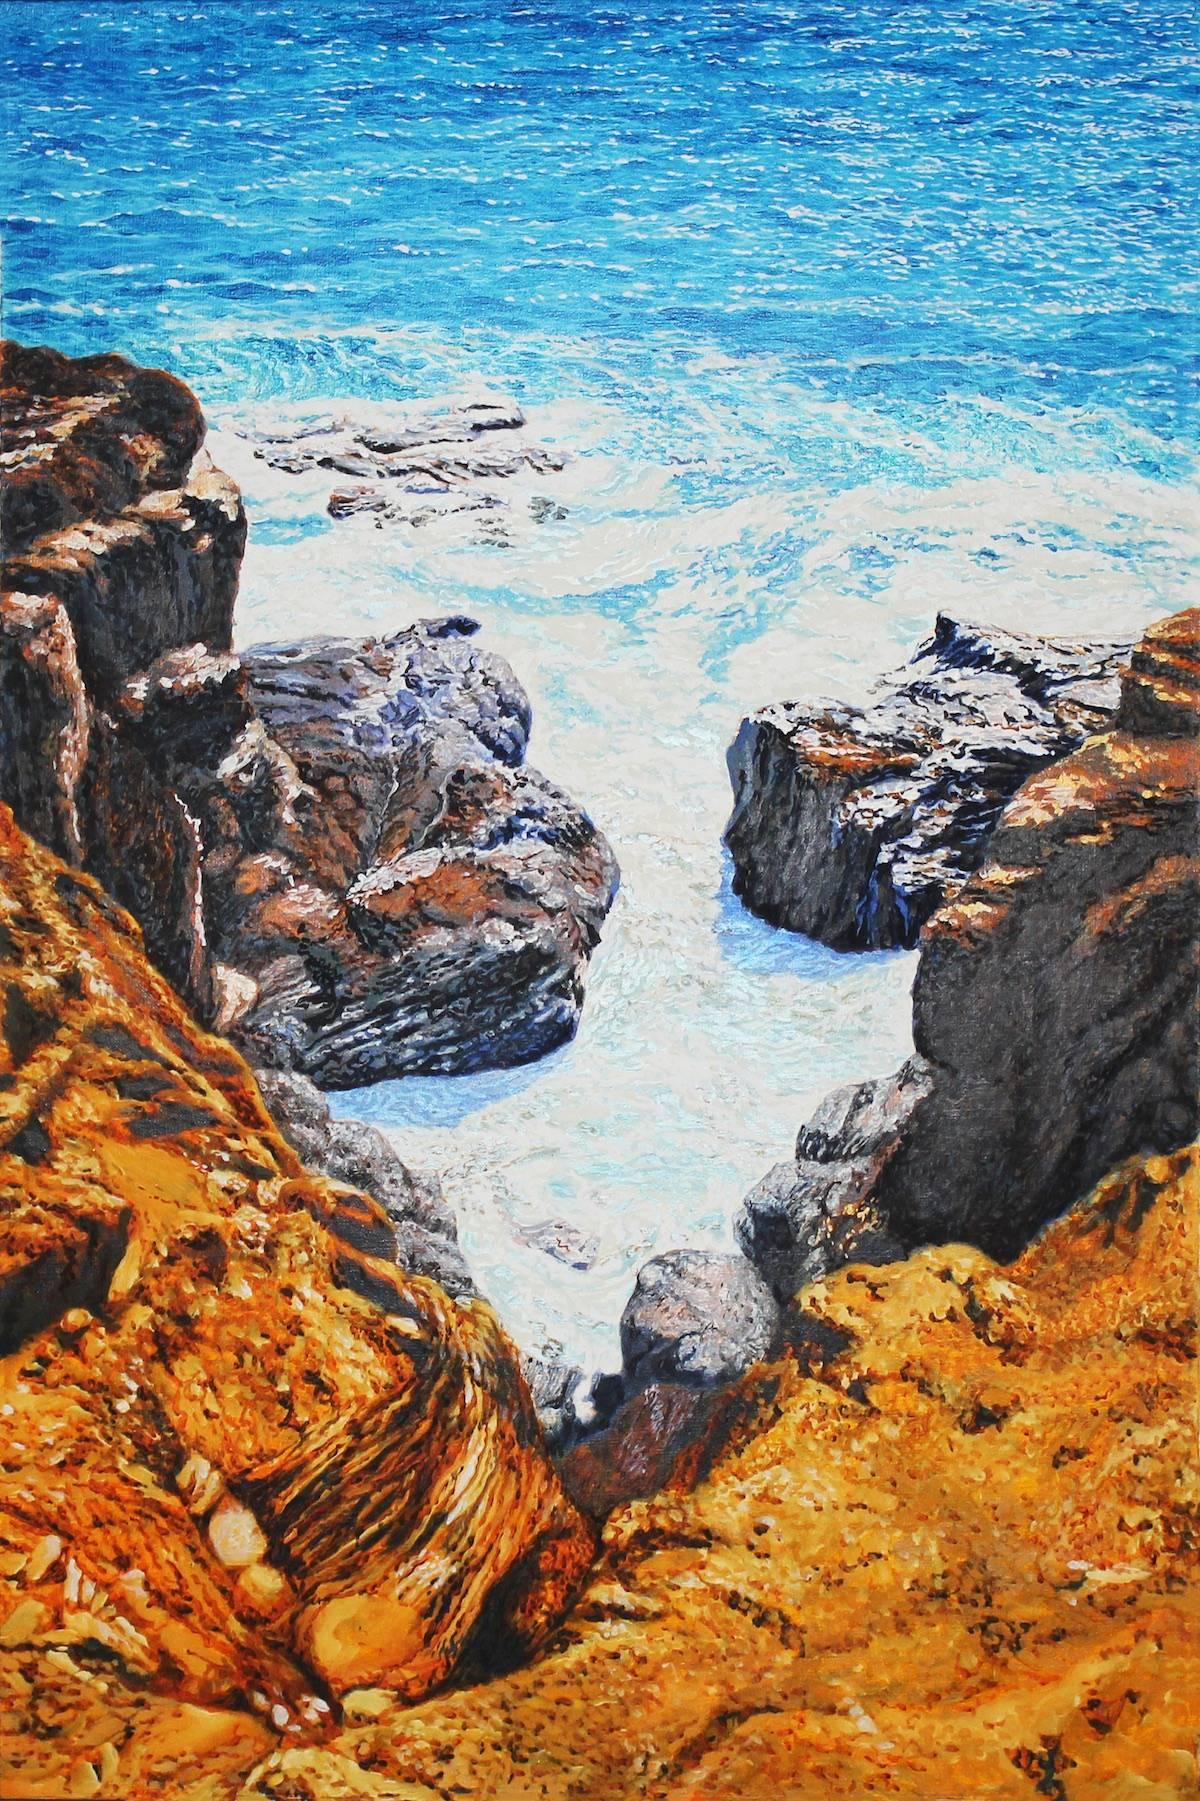 St. Barth, Beach Seascape with Boulders - Painting by Fabio Aguzzi